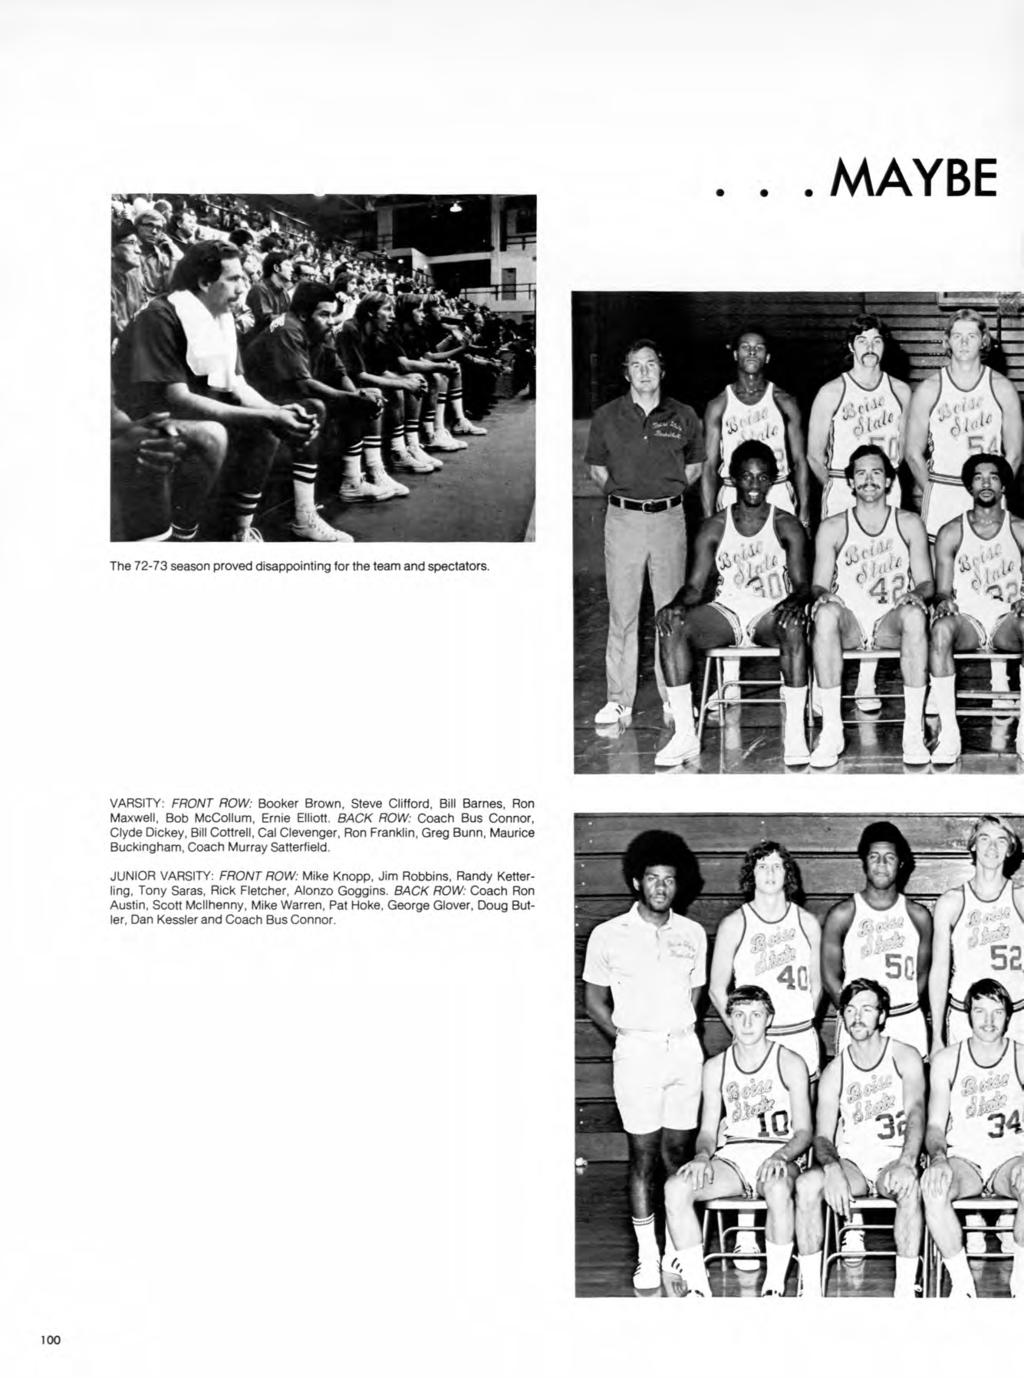 ... AAAYBE The 72-73 season proved disappointing for the team and spectators. VARSITY: FRONT ROW: Booker Brown, Steve Clifford, Bill Barnes, Ron Maxwell, Bob McCollum, Ernie Elliott.